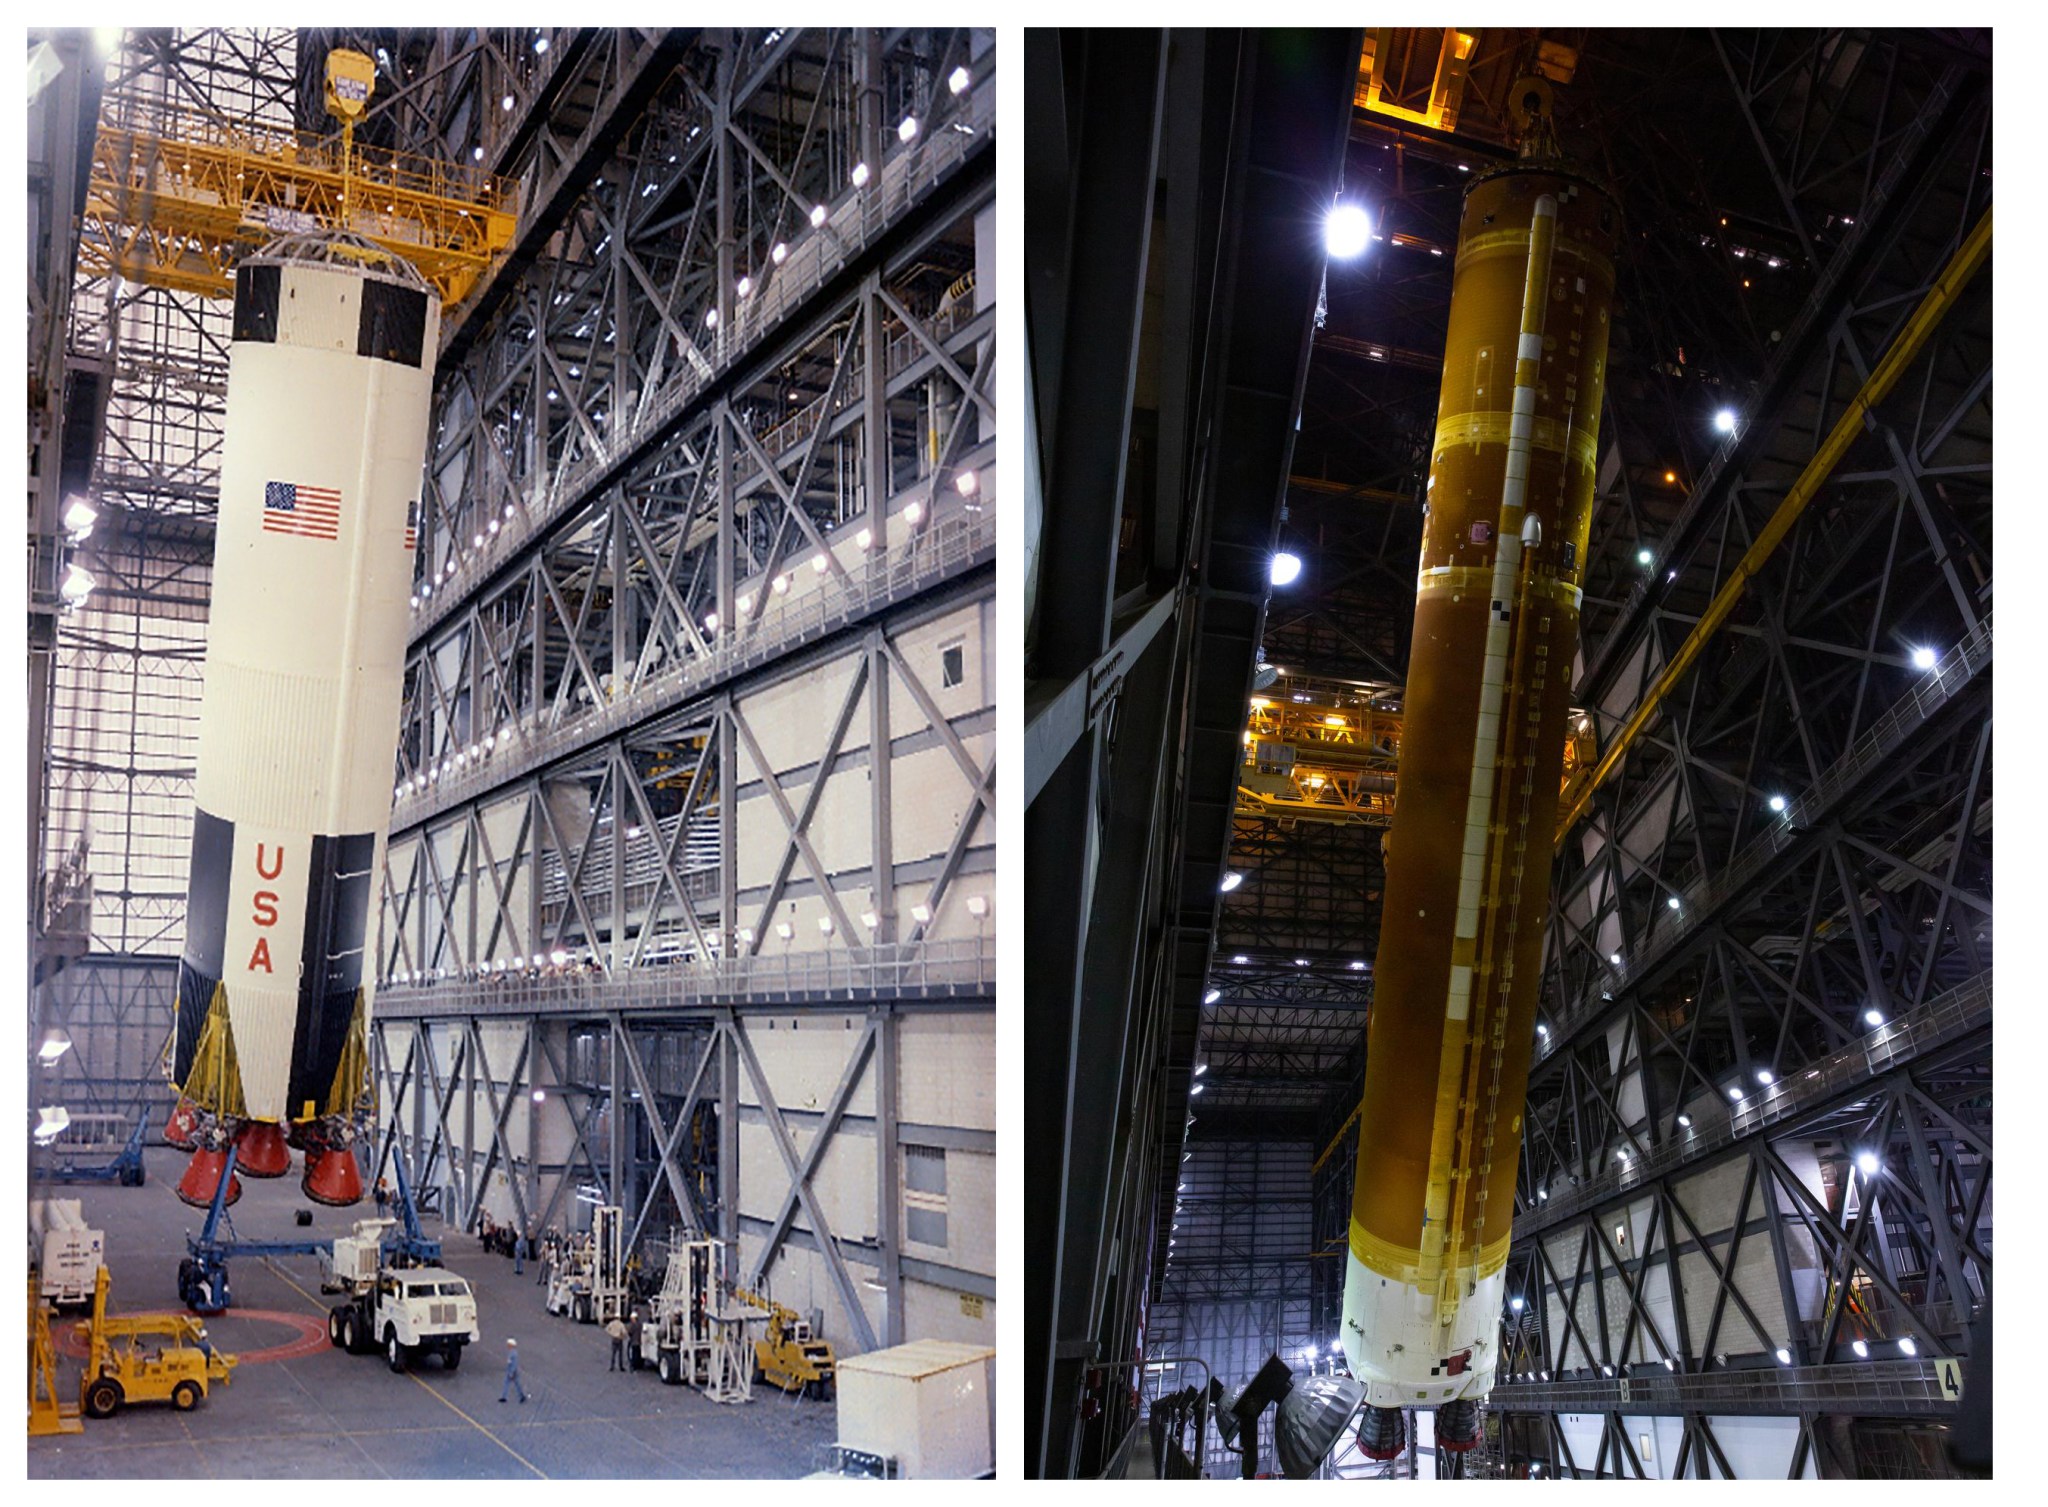 A side-by-side comparison of the first stage of the Saturn V Apollo Moon rocket and the core stage of the Space Launch System for Artemis missions to the Moon.